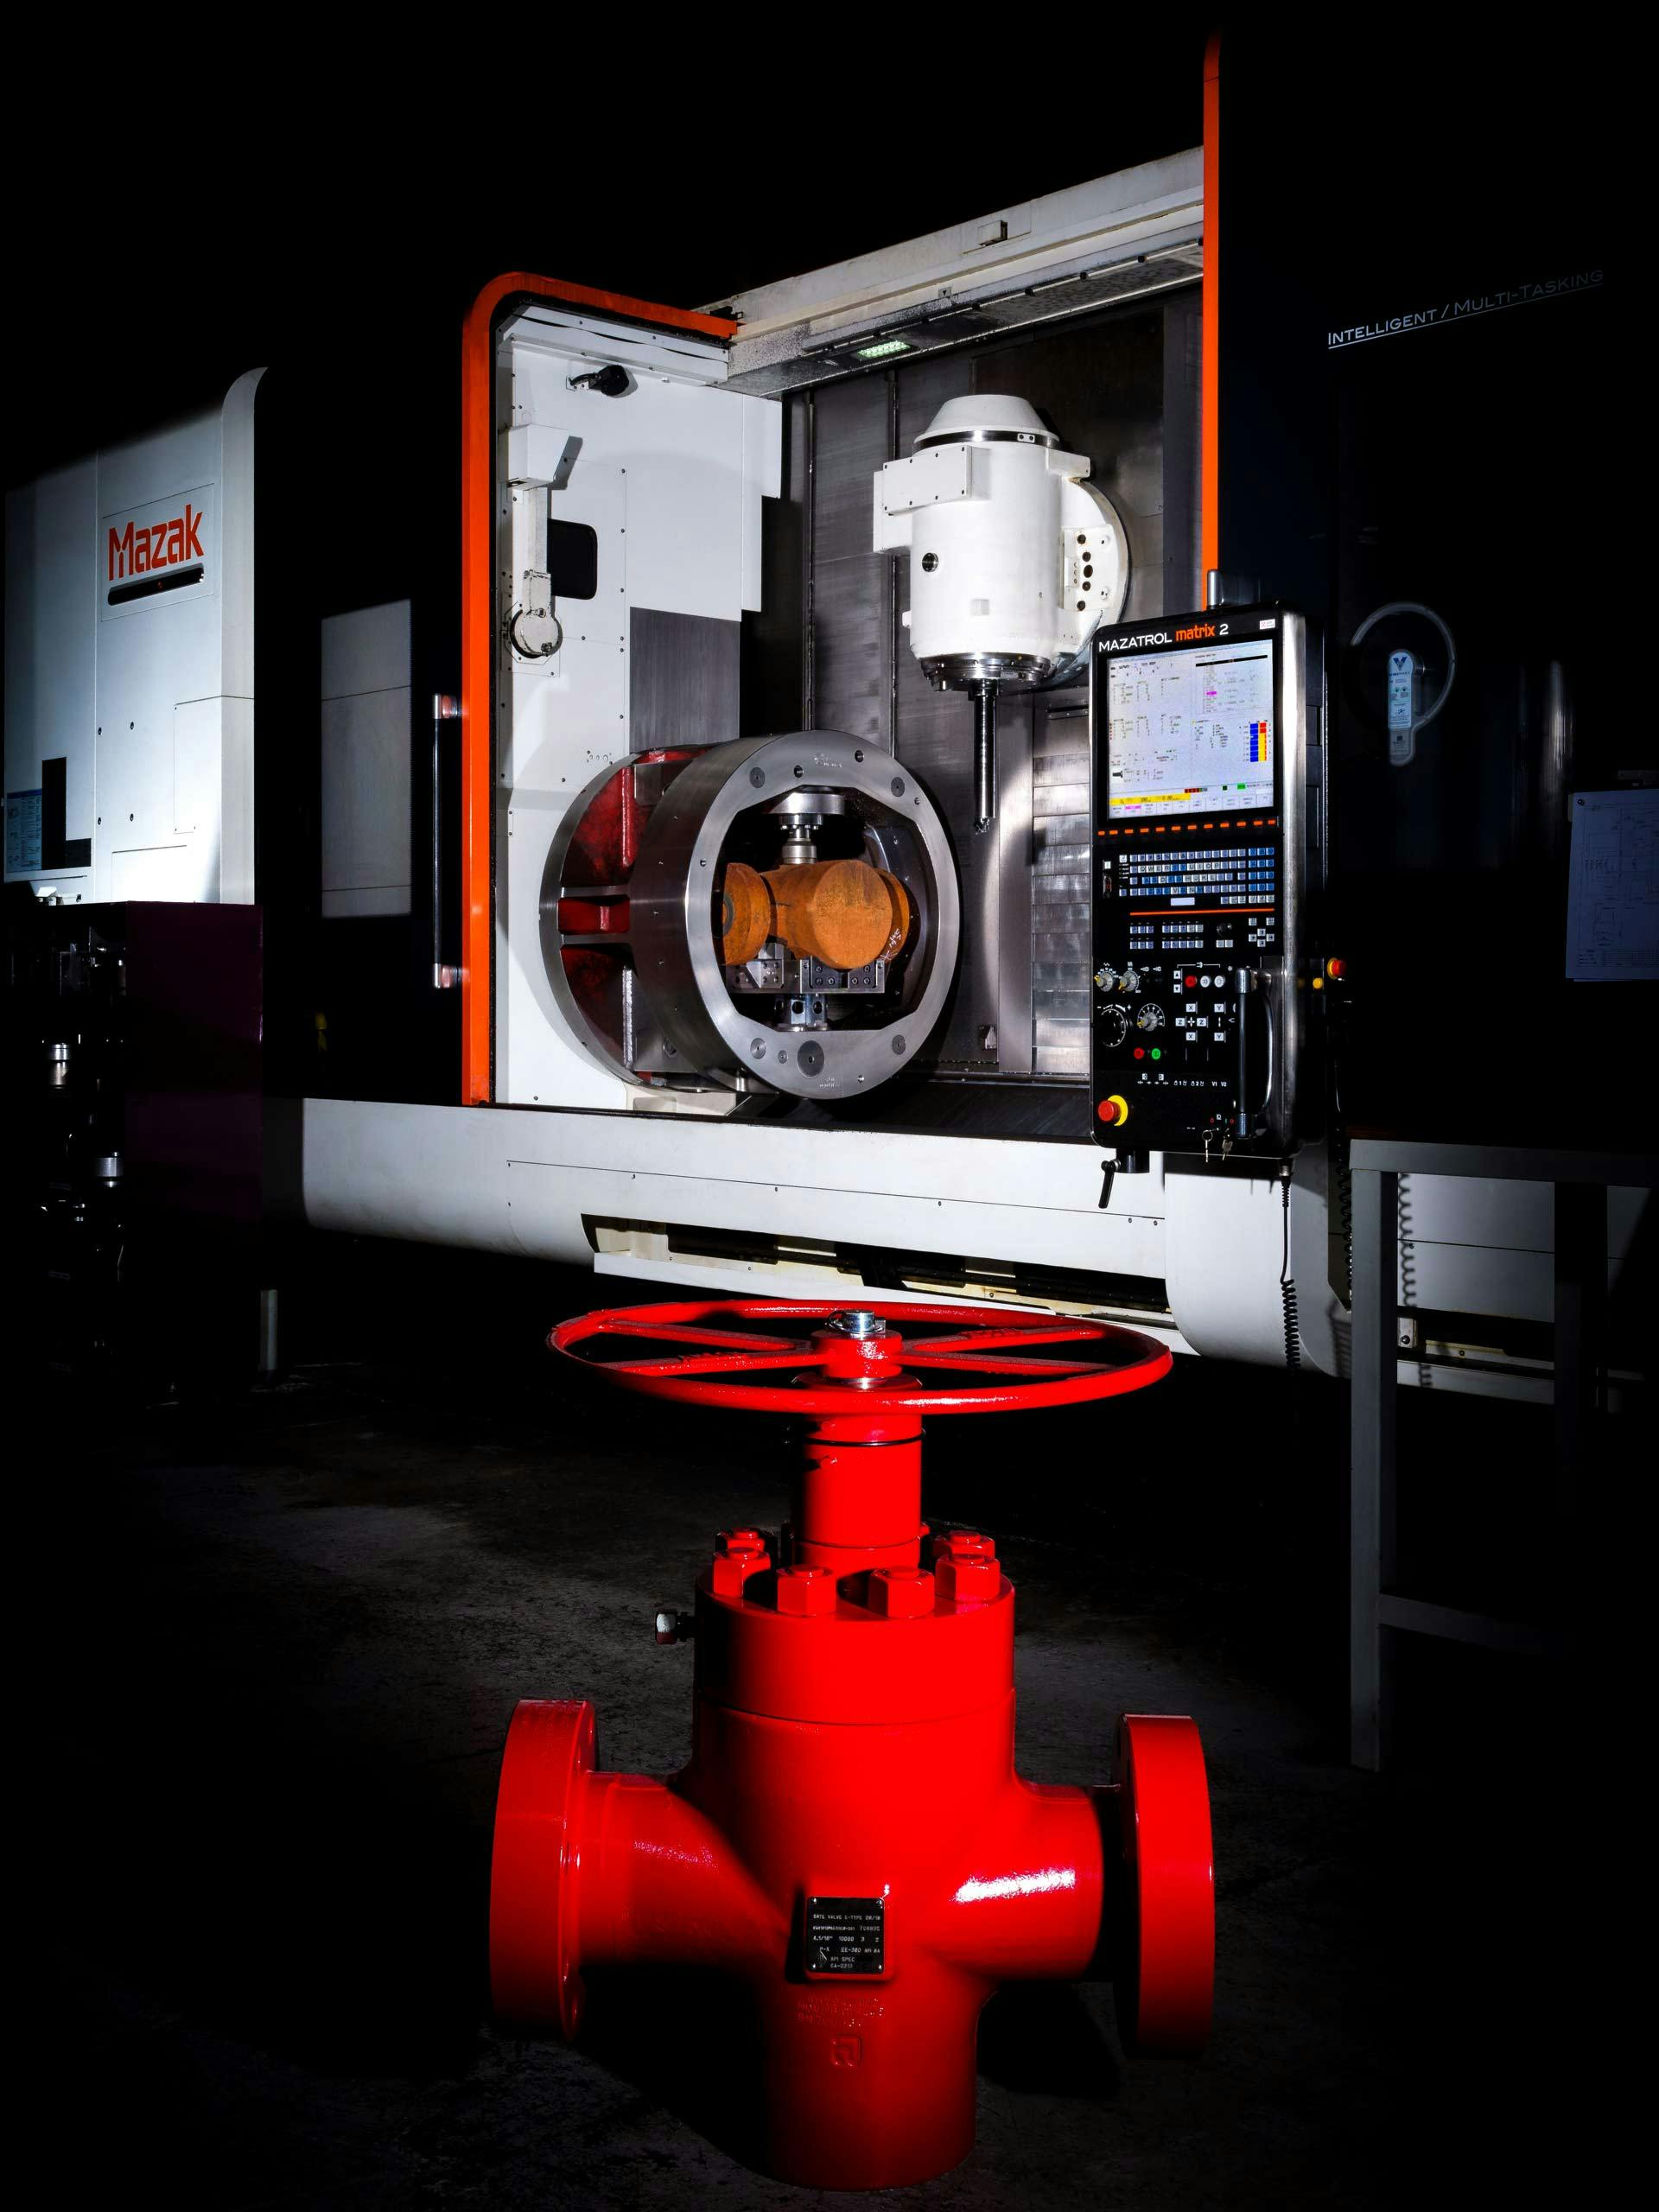 Photo of a gate valve and a gate valve machine in the background